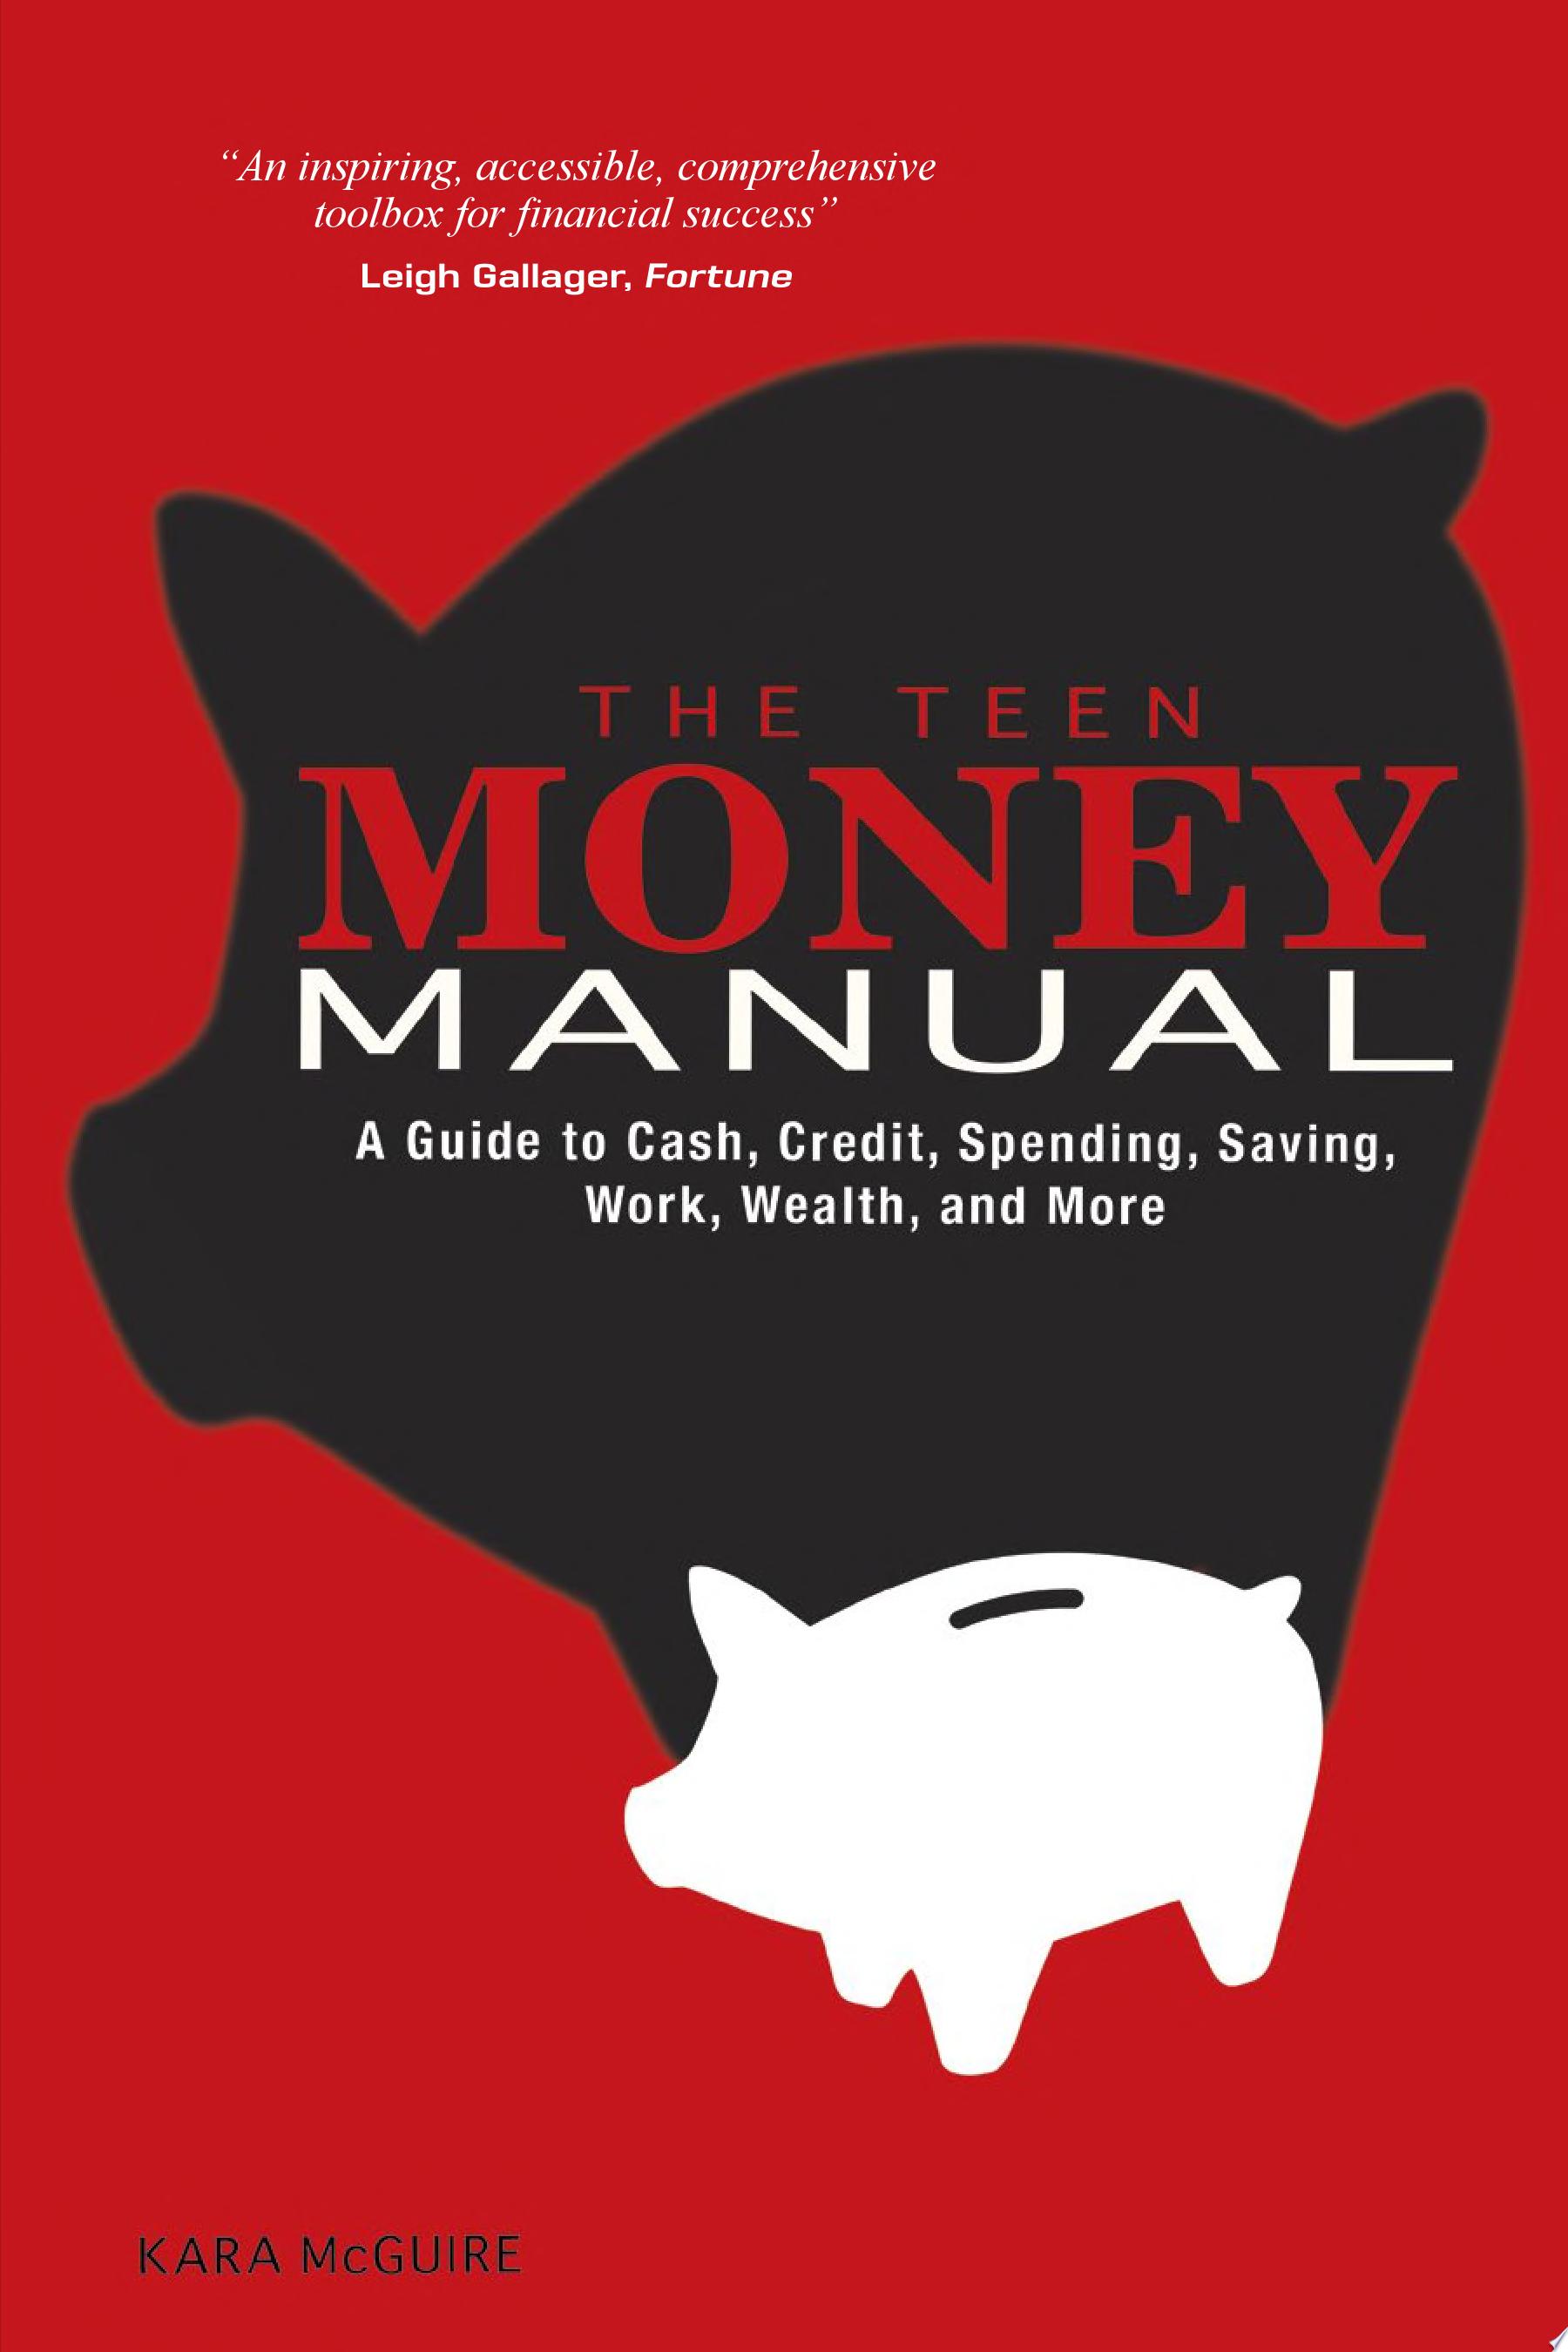 Image for "The Teen Money Manual"